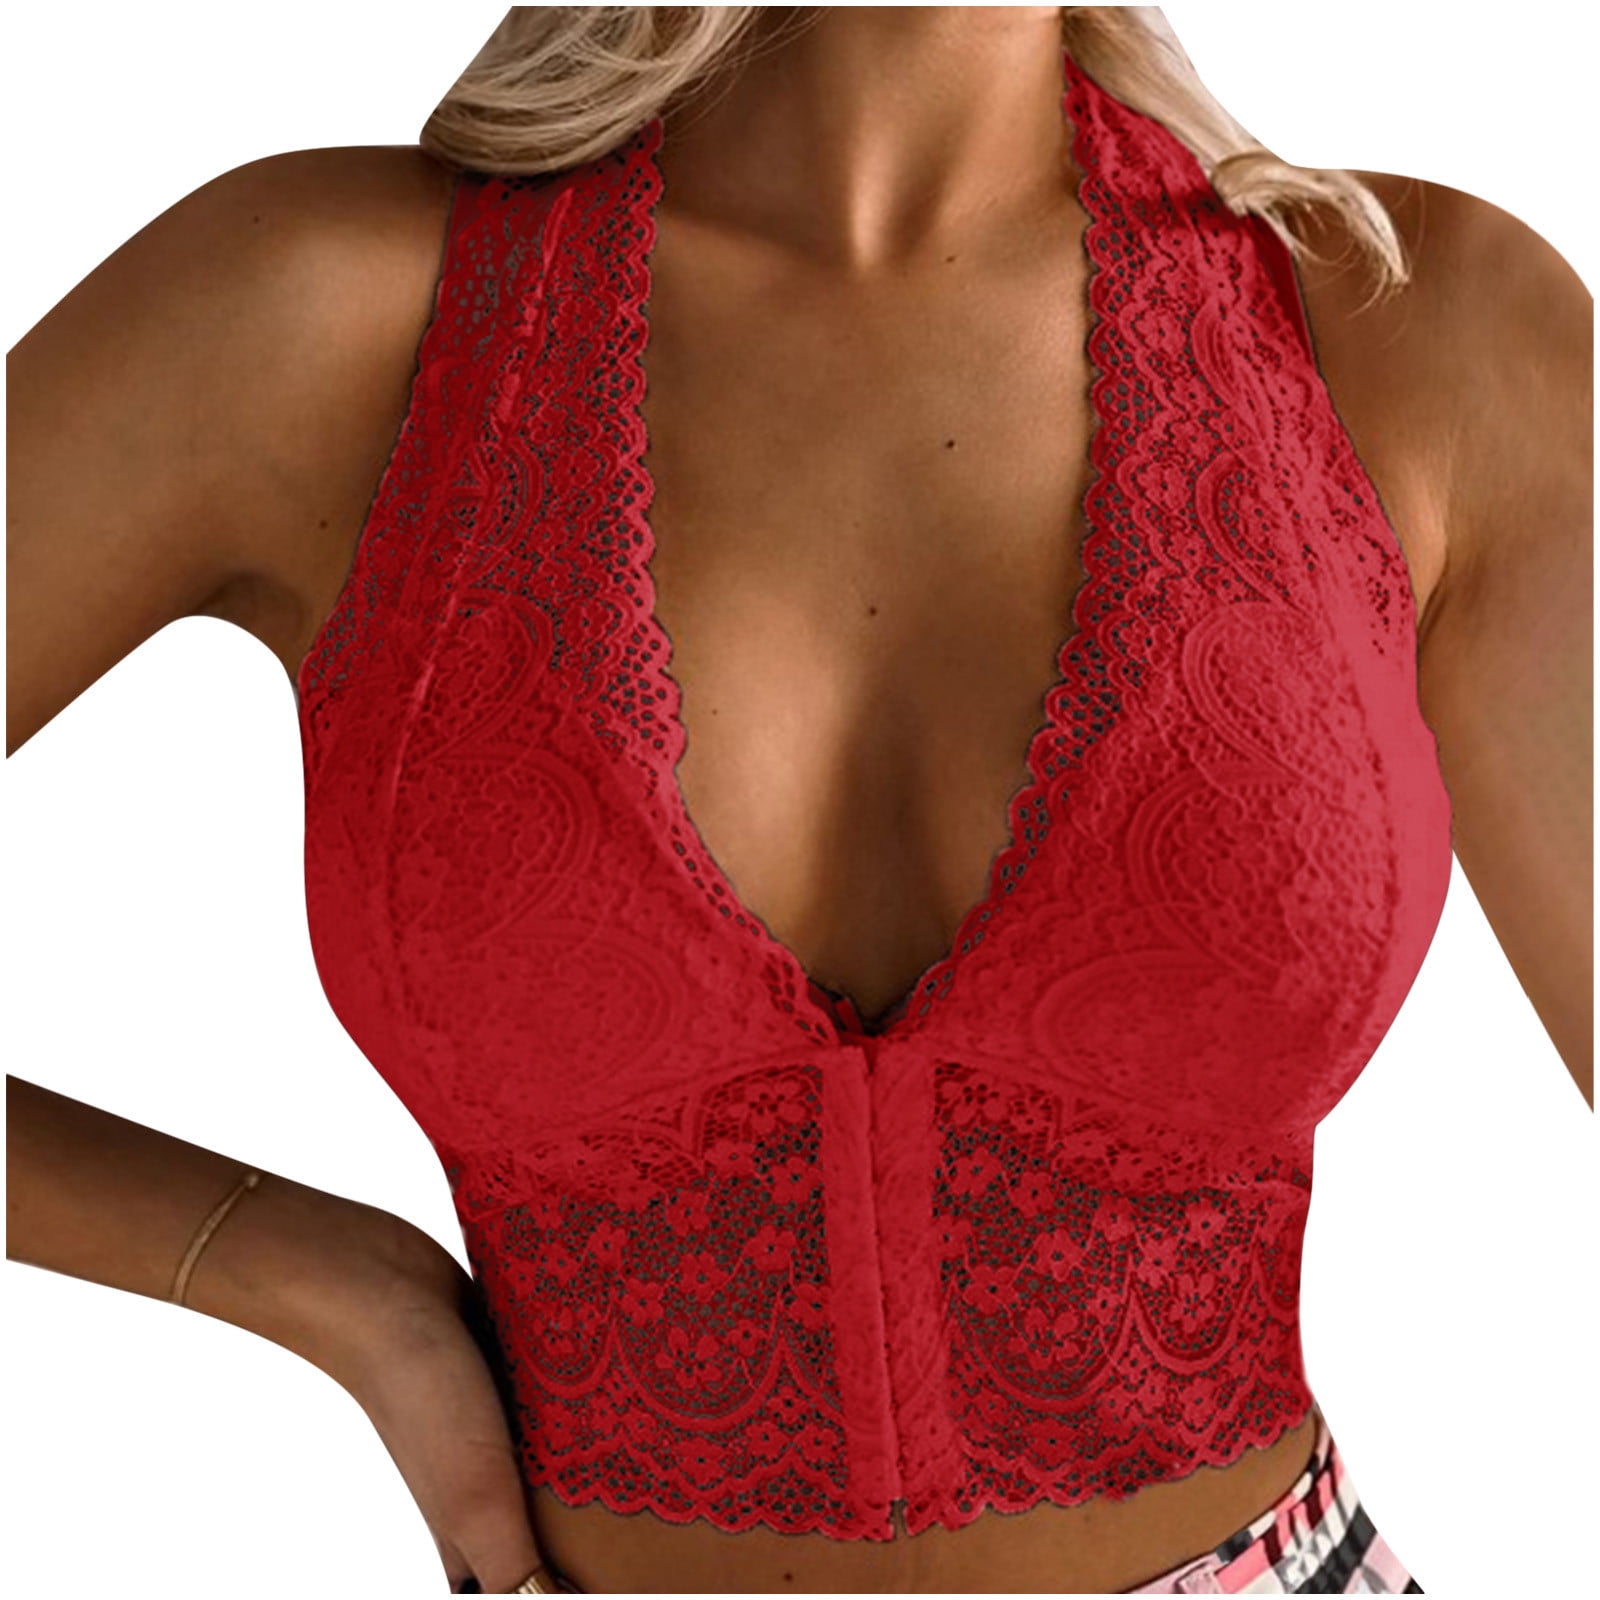 YYDGH Women's High Neck Deep V Lace Bralette Padded Lace